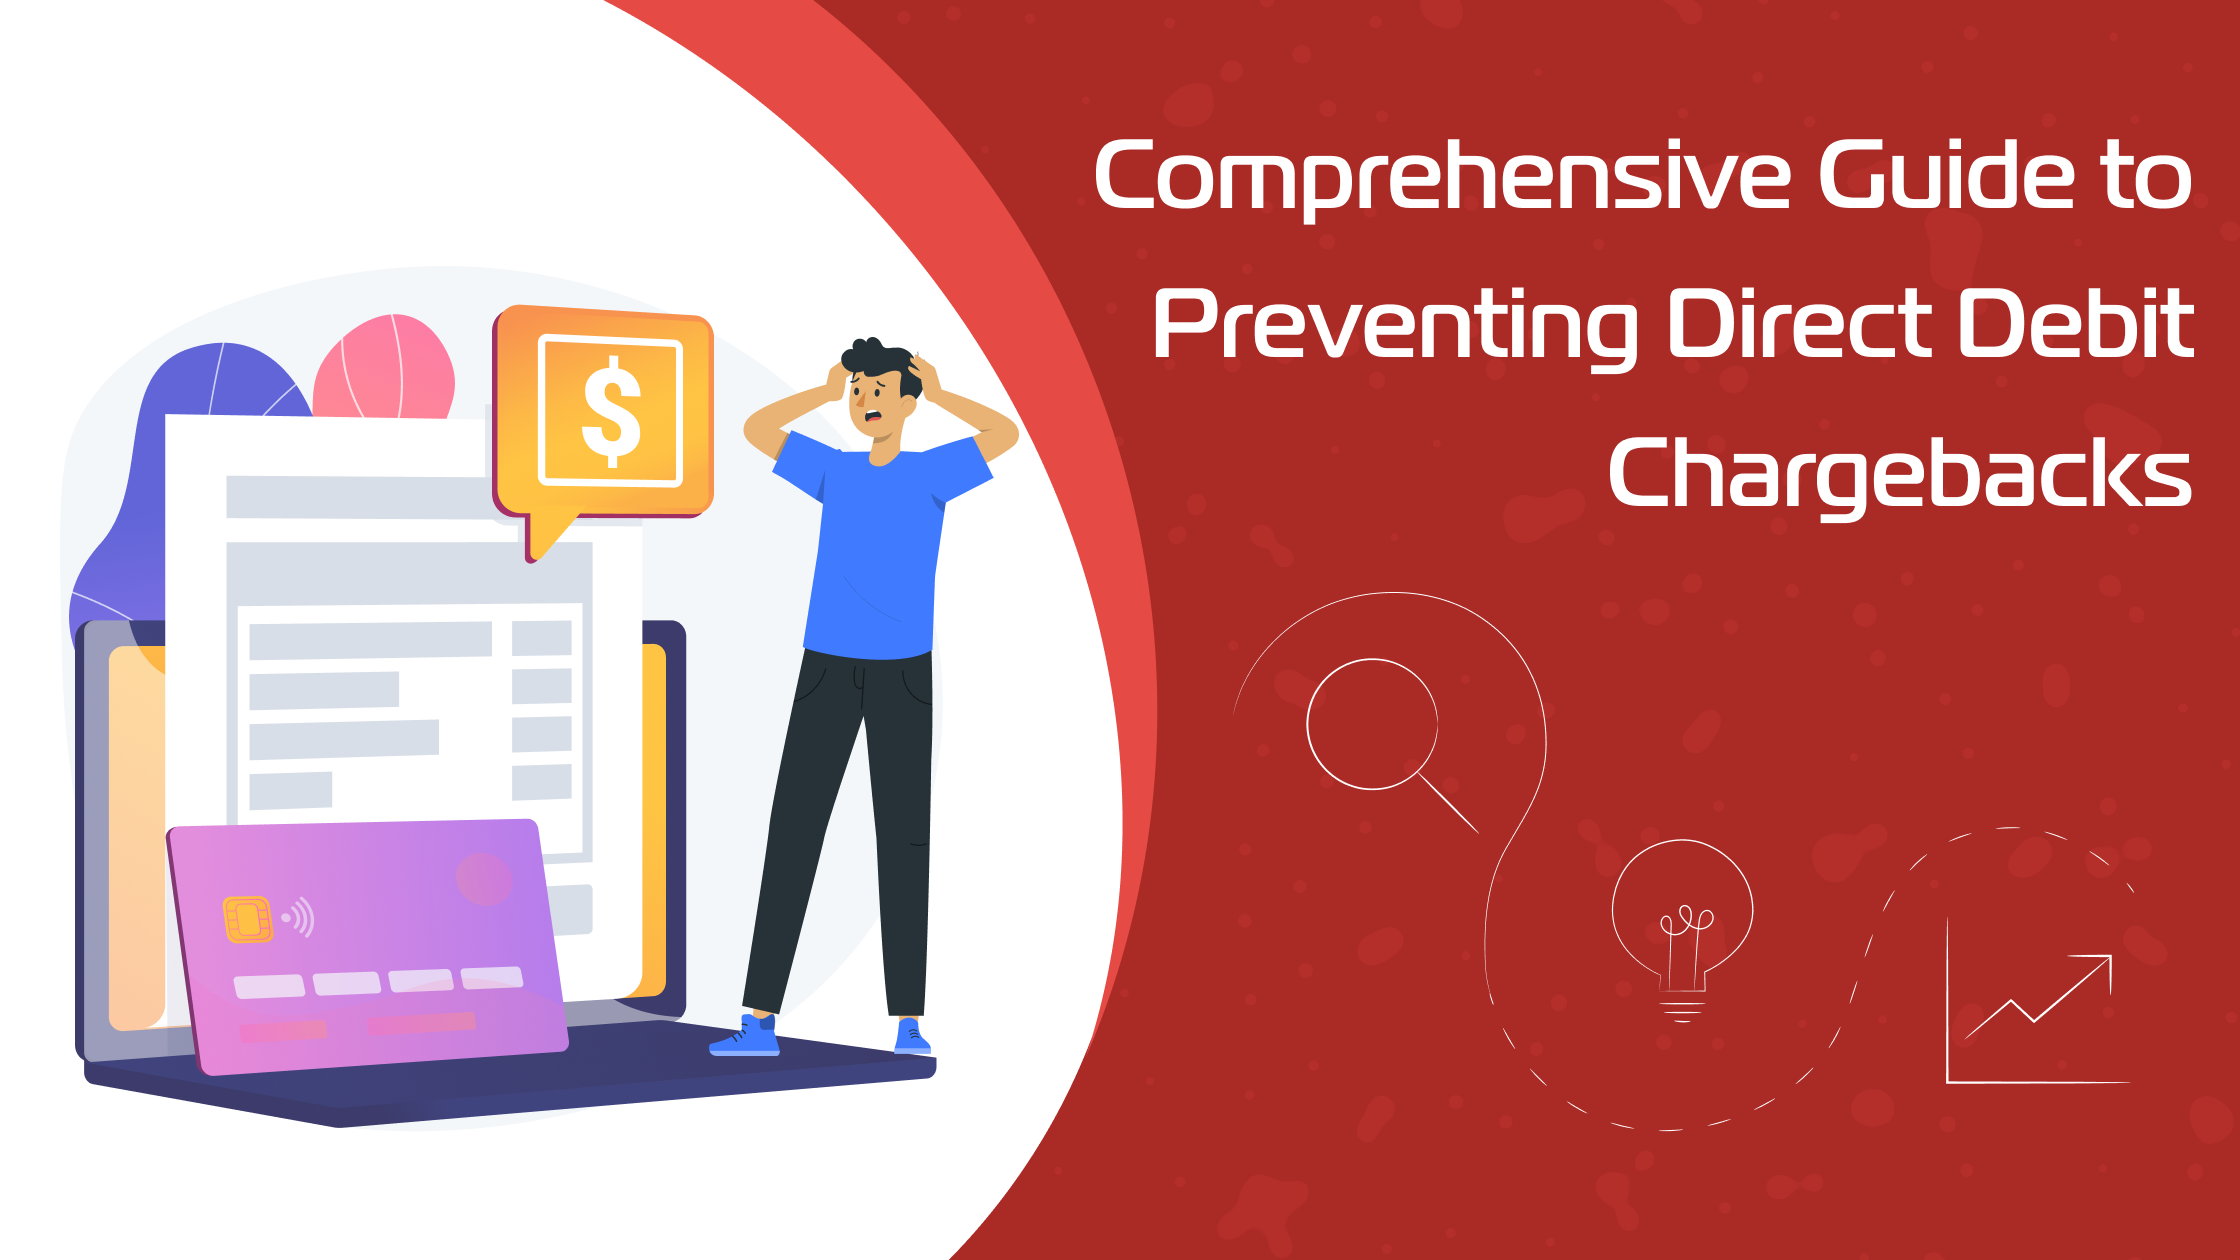 Comprehensive Guide to Preventing Direct Debit Chargebacks